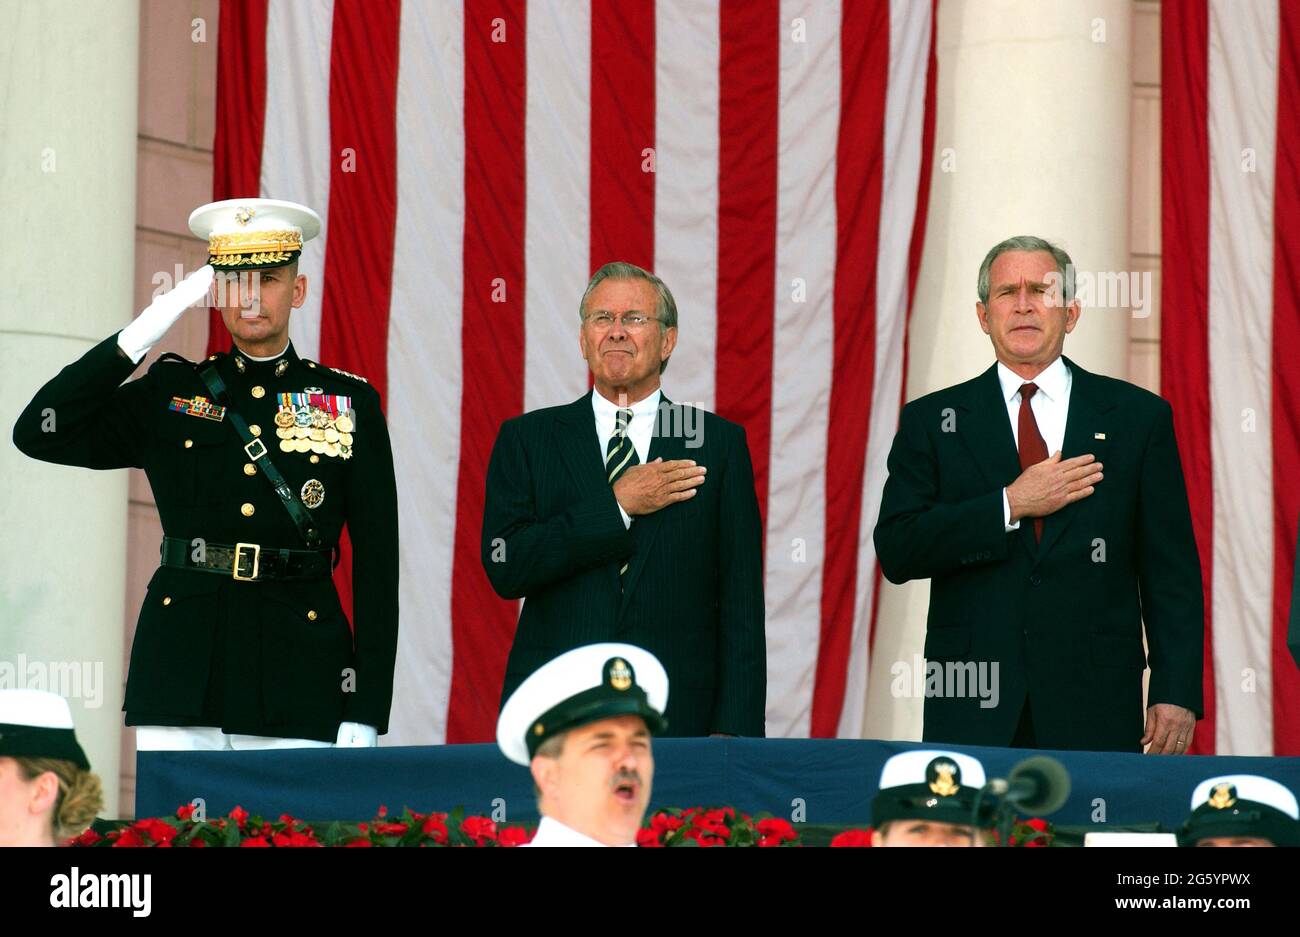 File photo dated May 29, 2006 of United States President George W. Bush, right, listens to the national anthem prior to making remarks at the annual Arlington National Cemetery Memorial Day Commemoration at Arlington National Cemetery in Arlington, Virginia, USA From left to right: General Peter Pace, Chairman of the Joint Chiefs of Staff; United States Secretary of Defense Donald Rumsfeld; and President Bush. Donald Rumsfeld, the acerbic architect of the Iraq war and a master Washington power player who served as US secretary of defense for two presidents, has died at the age of 88. Photo by Stock Photo